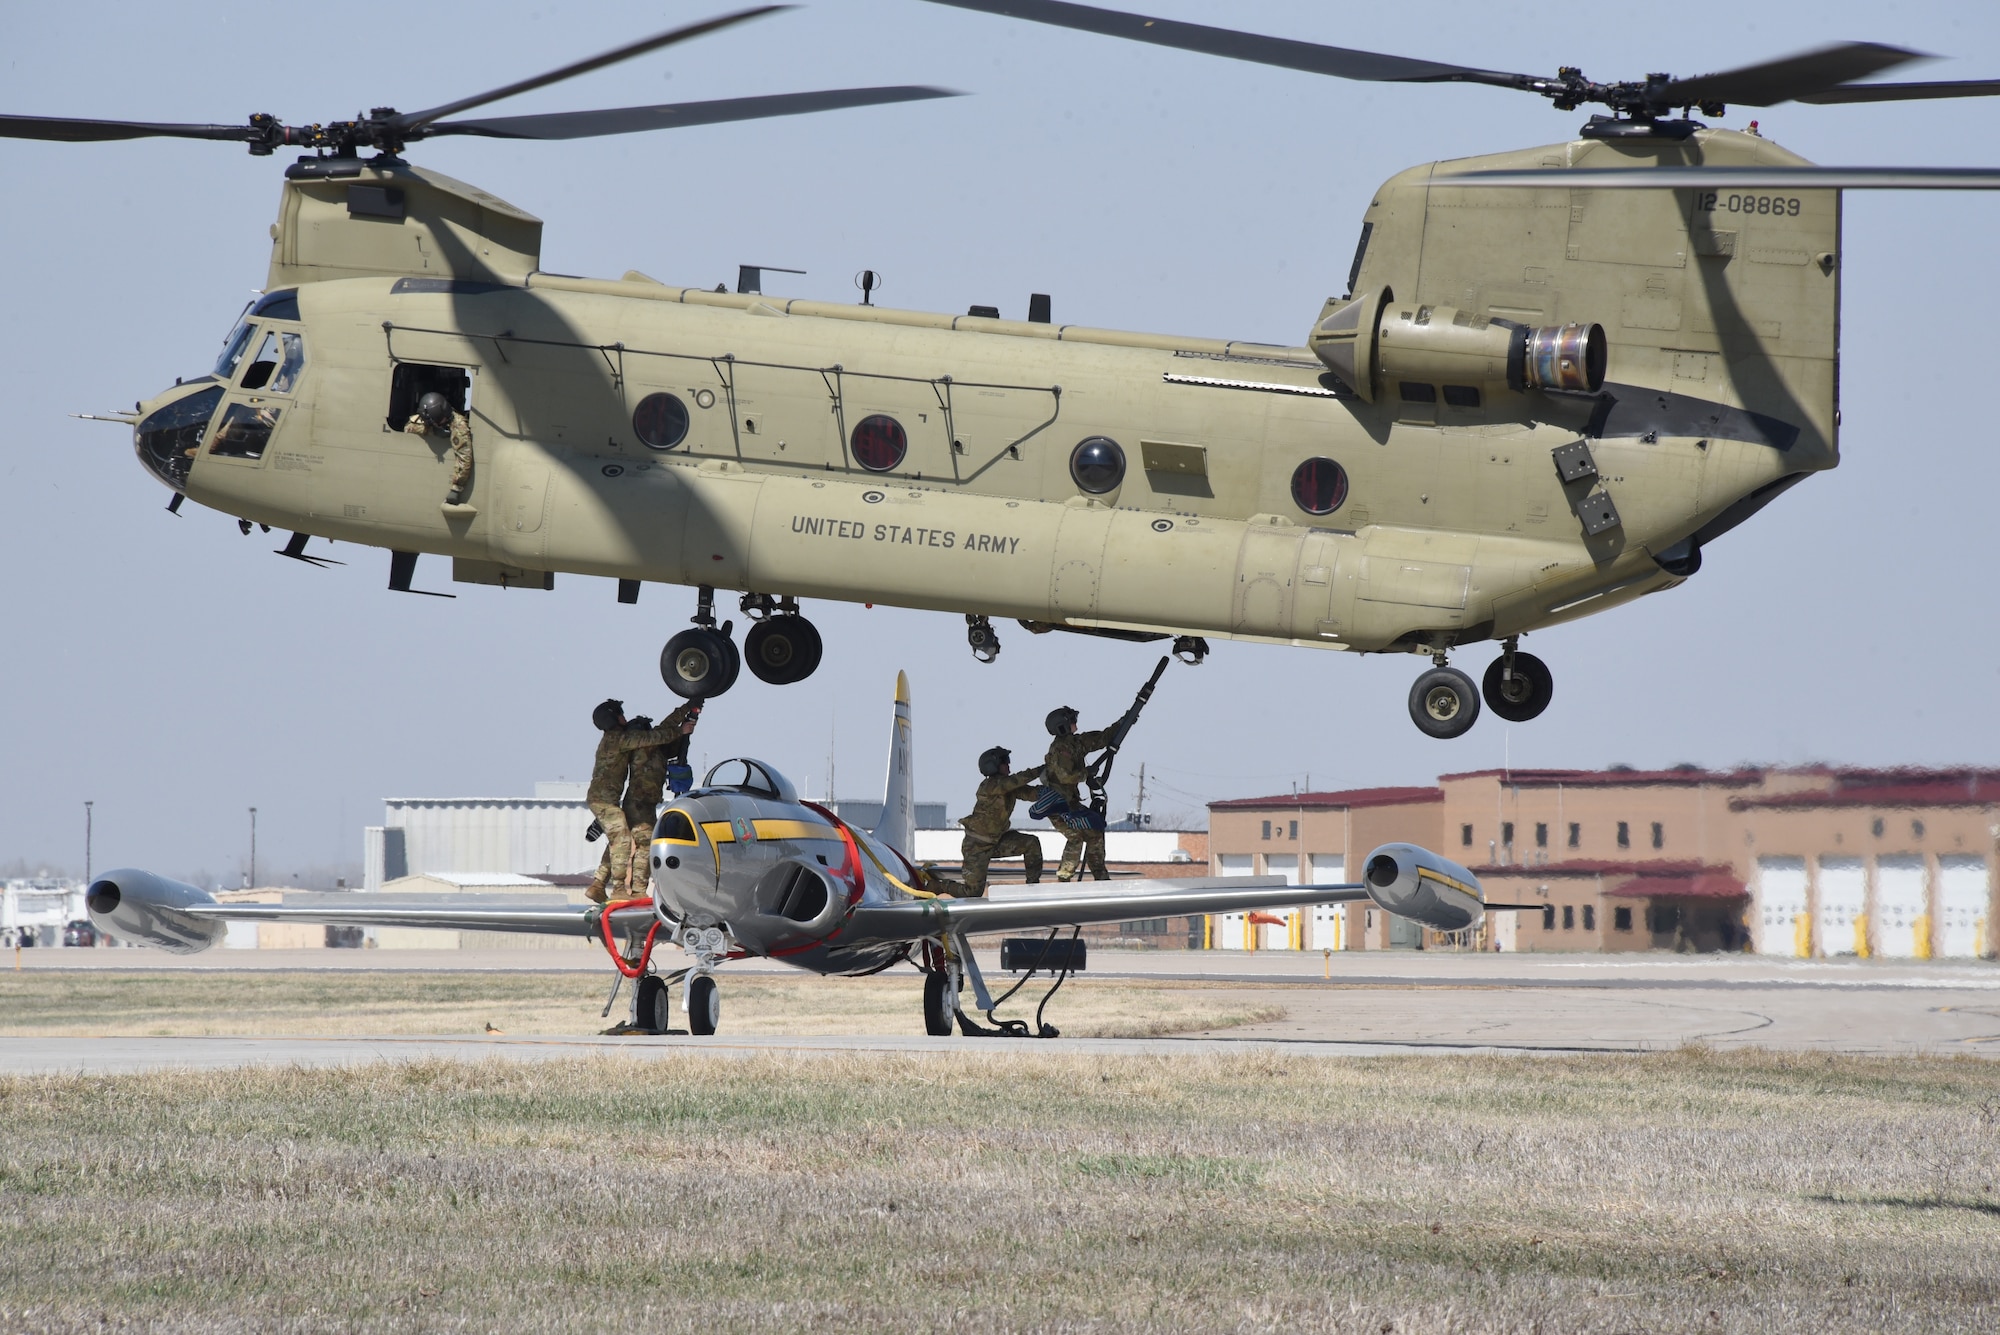 Iowa Army National Guard CH-47 Chinook helicopter picks up a F-80 fighter jet at the Air National Guard paint facility